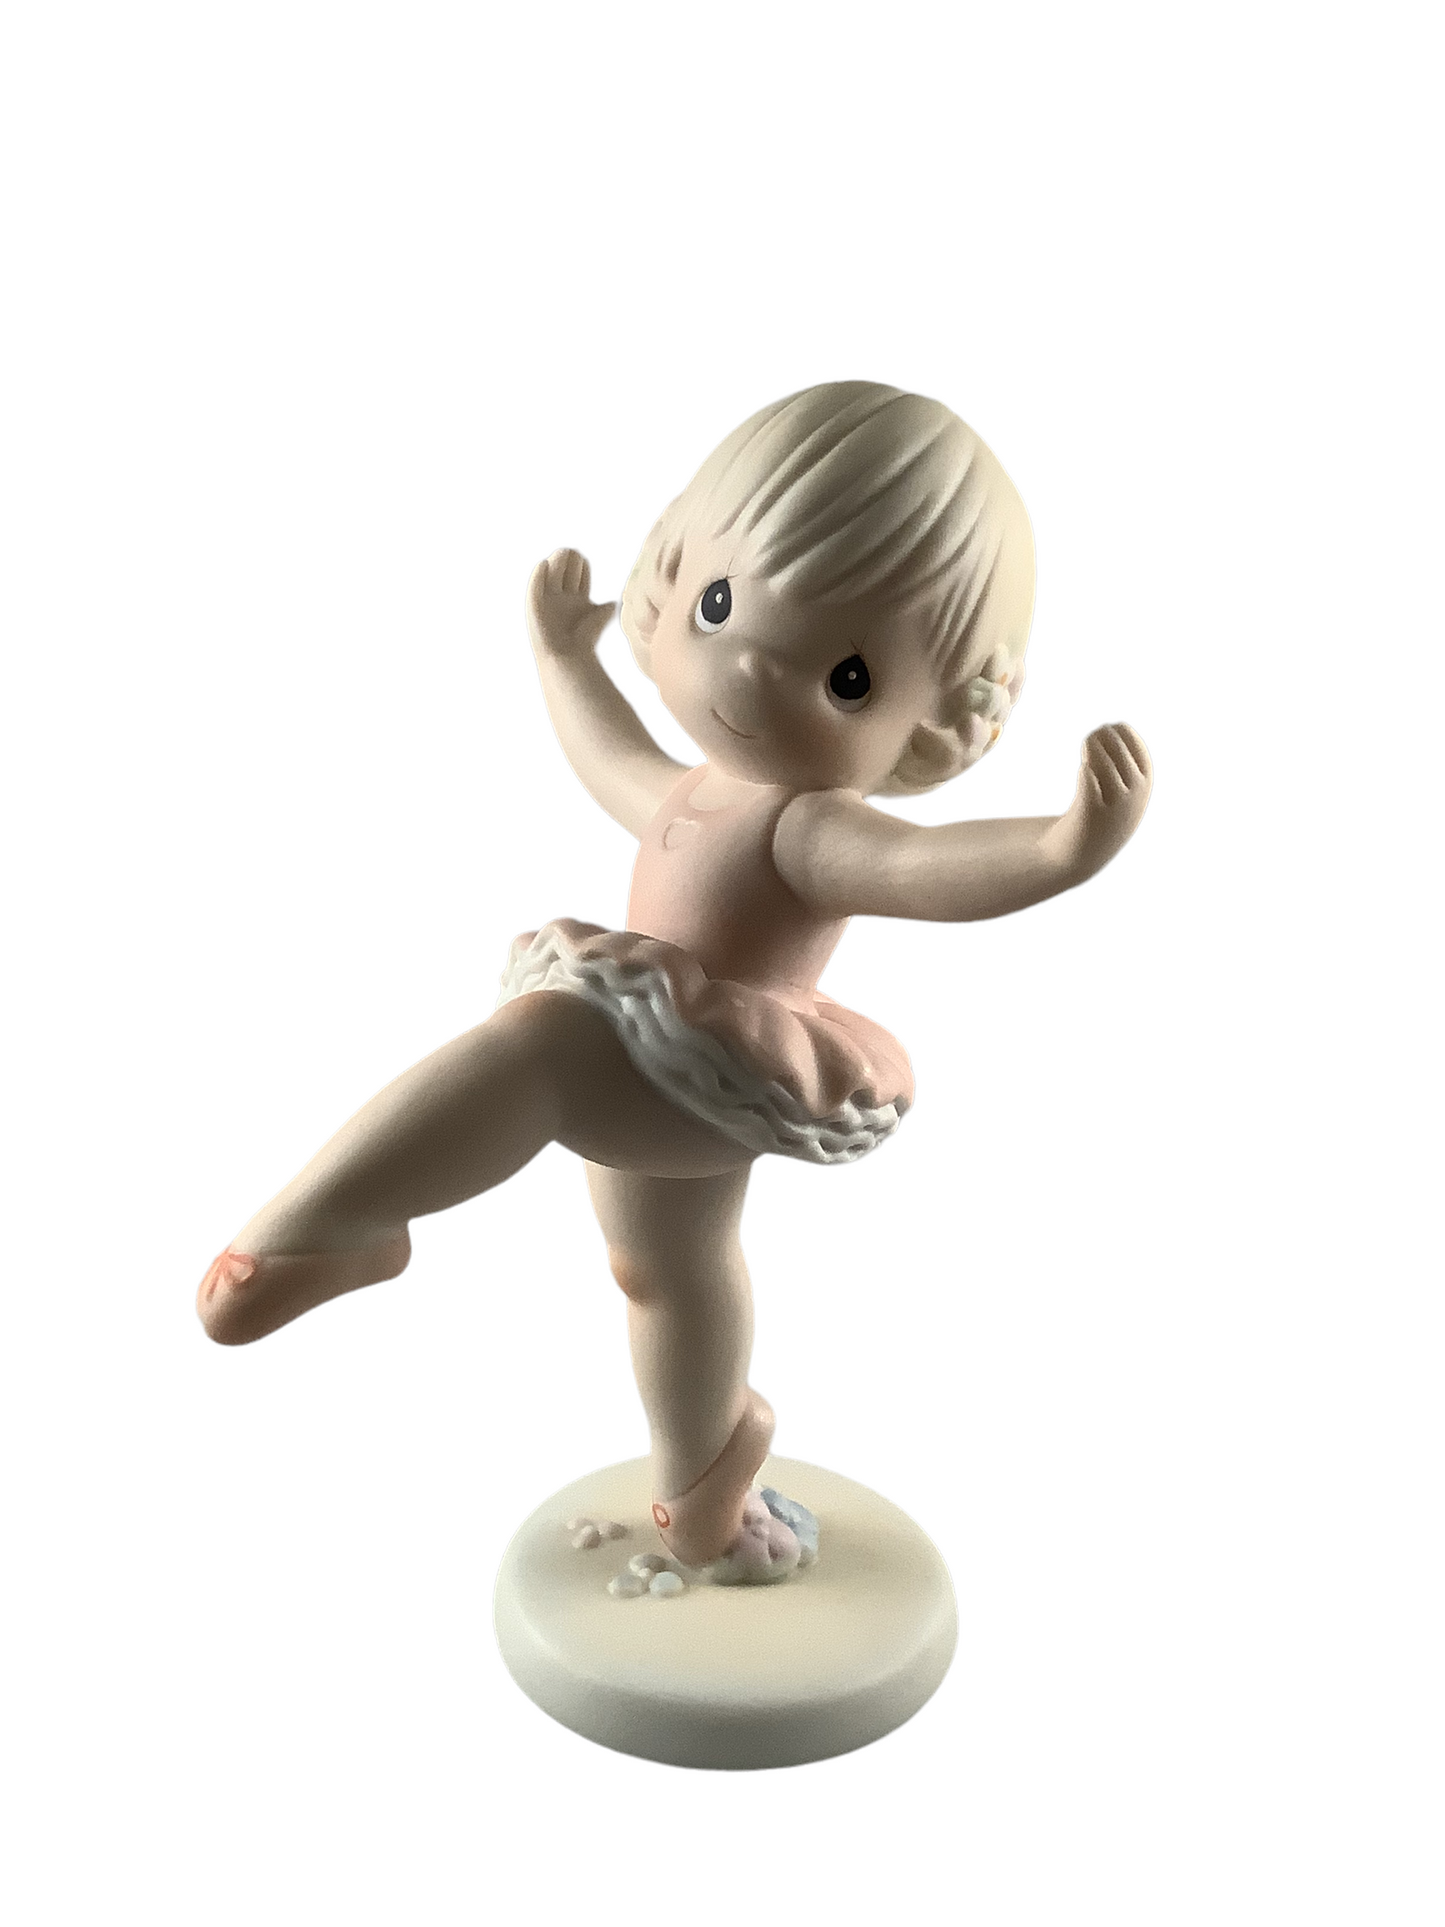 The Lord Turned My Life Around - Precious Moment Figurine